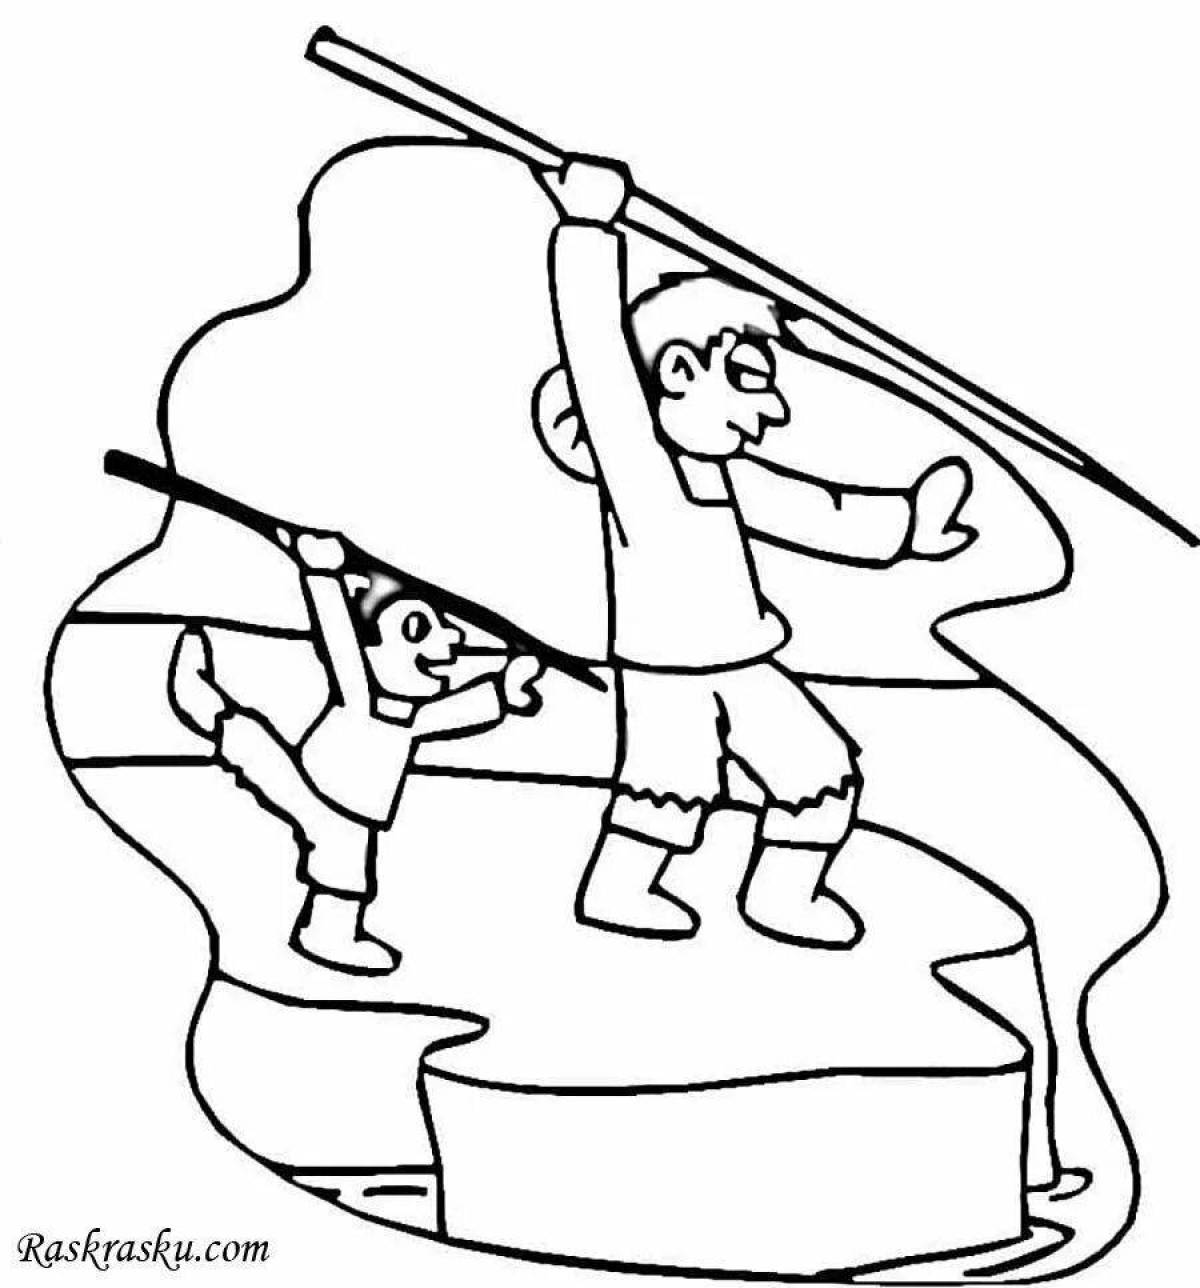 Fearless hunter coloring page